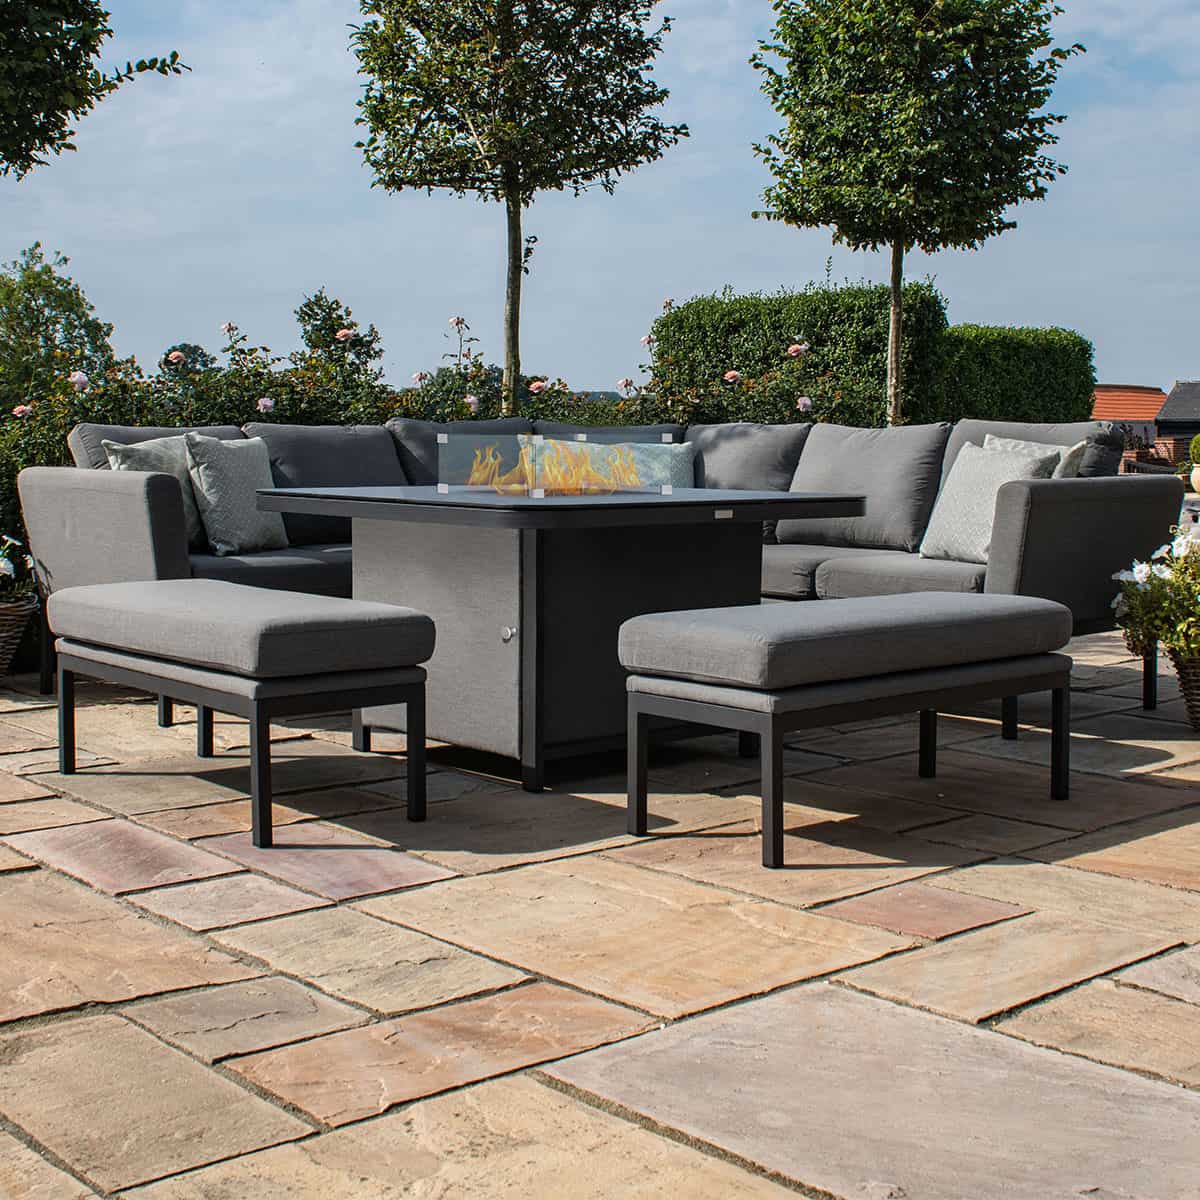 Fabric square corner dining set with firepit table and two benches #colour_flanelle